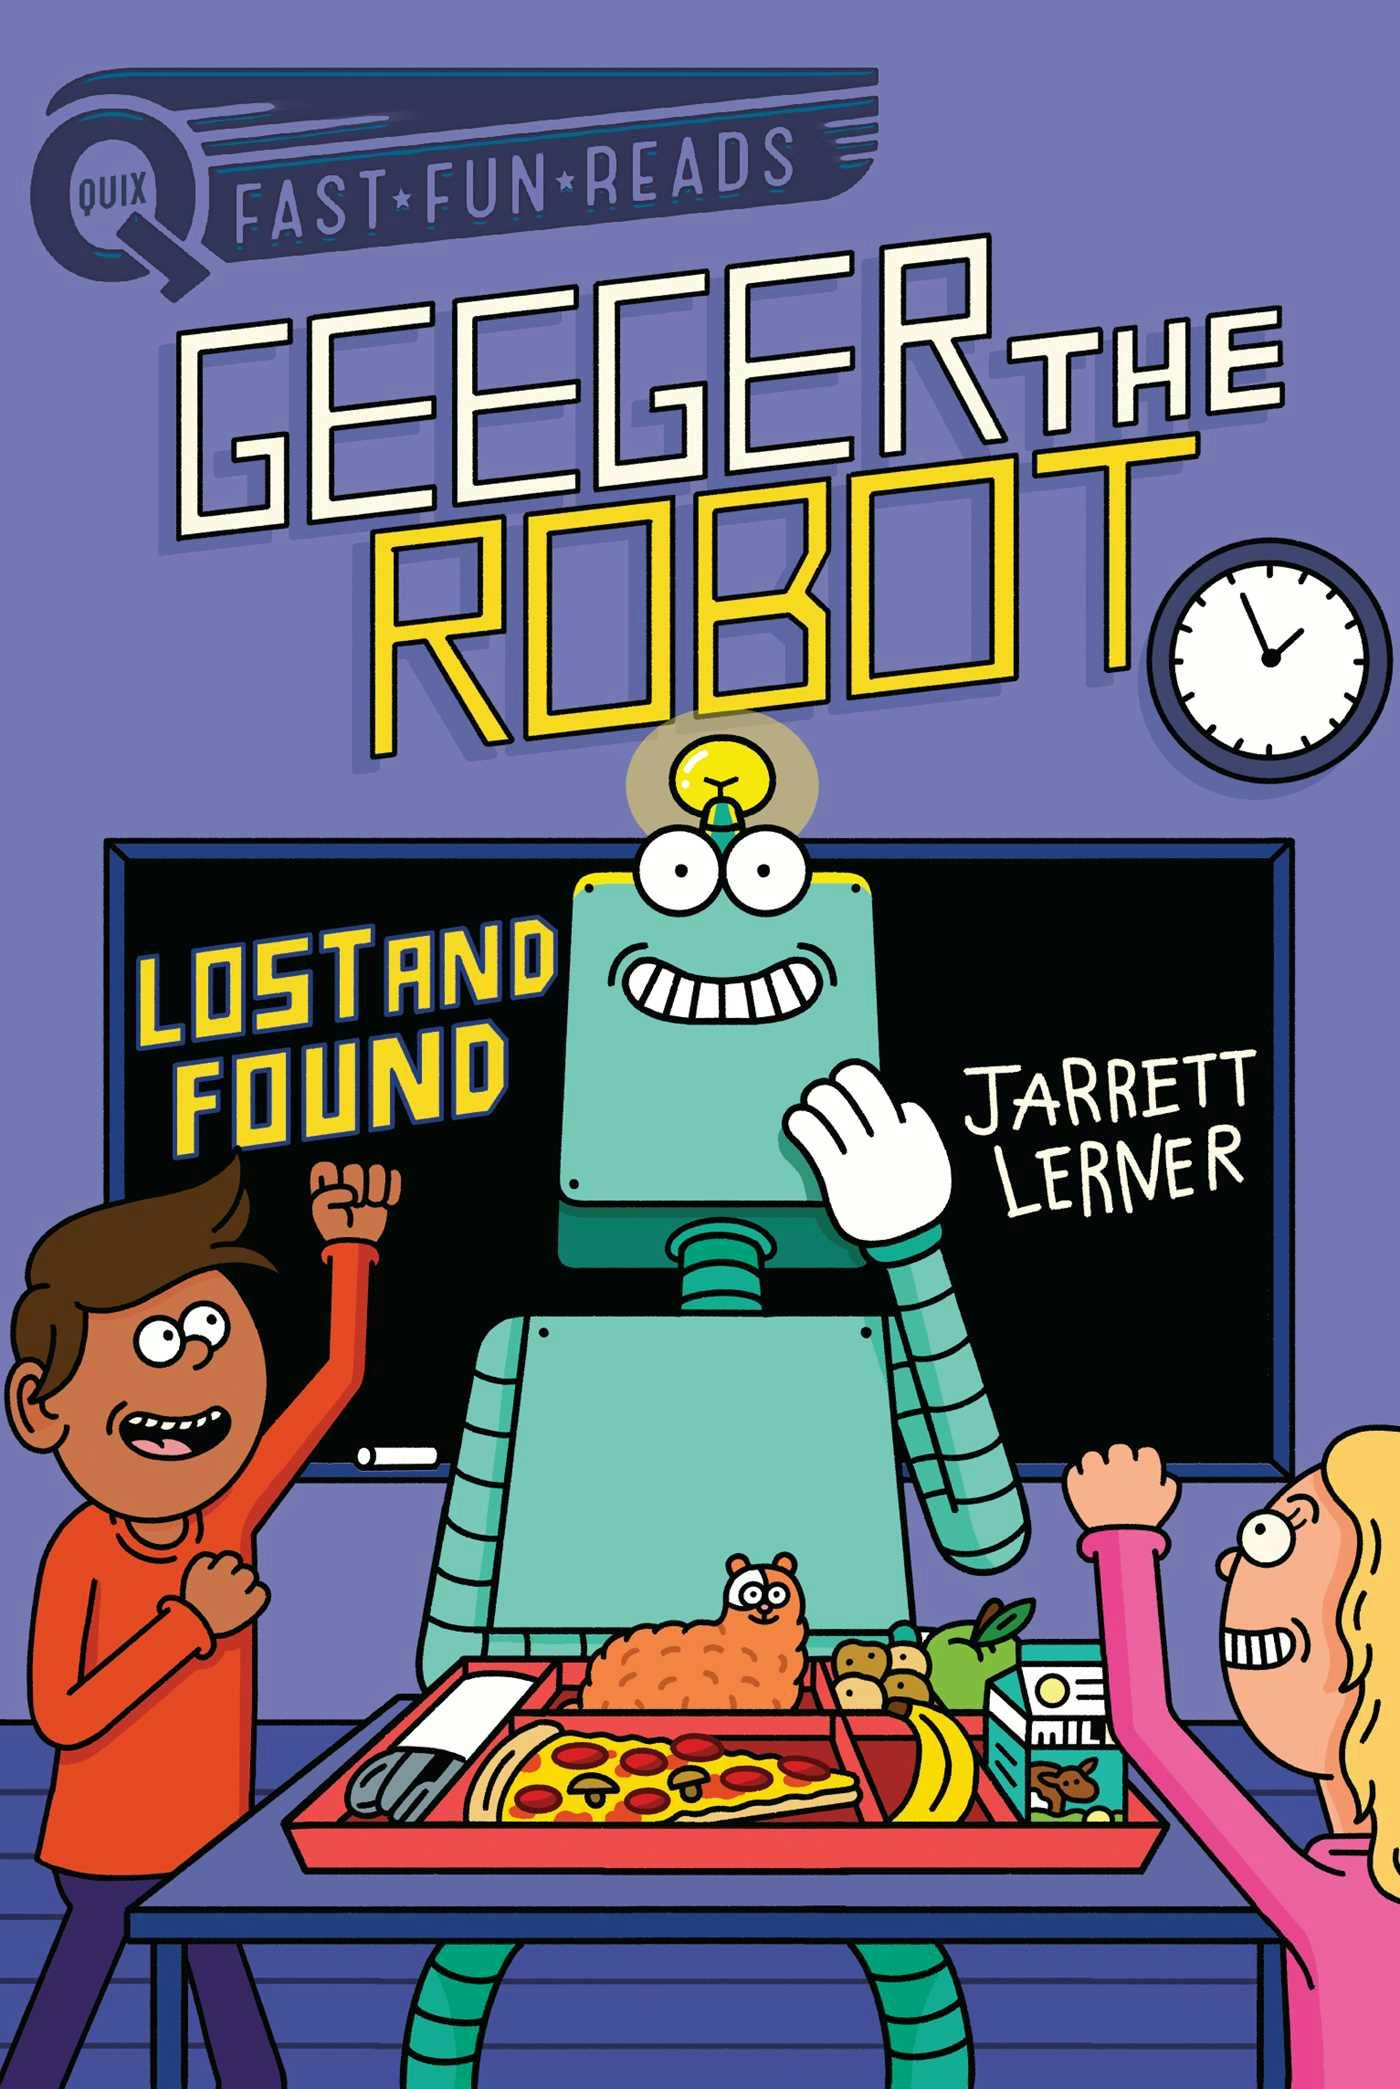 Lost and Found: Geeger the Robot - undefined